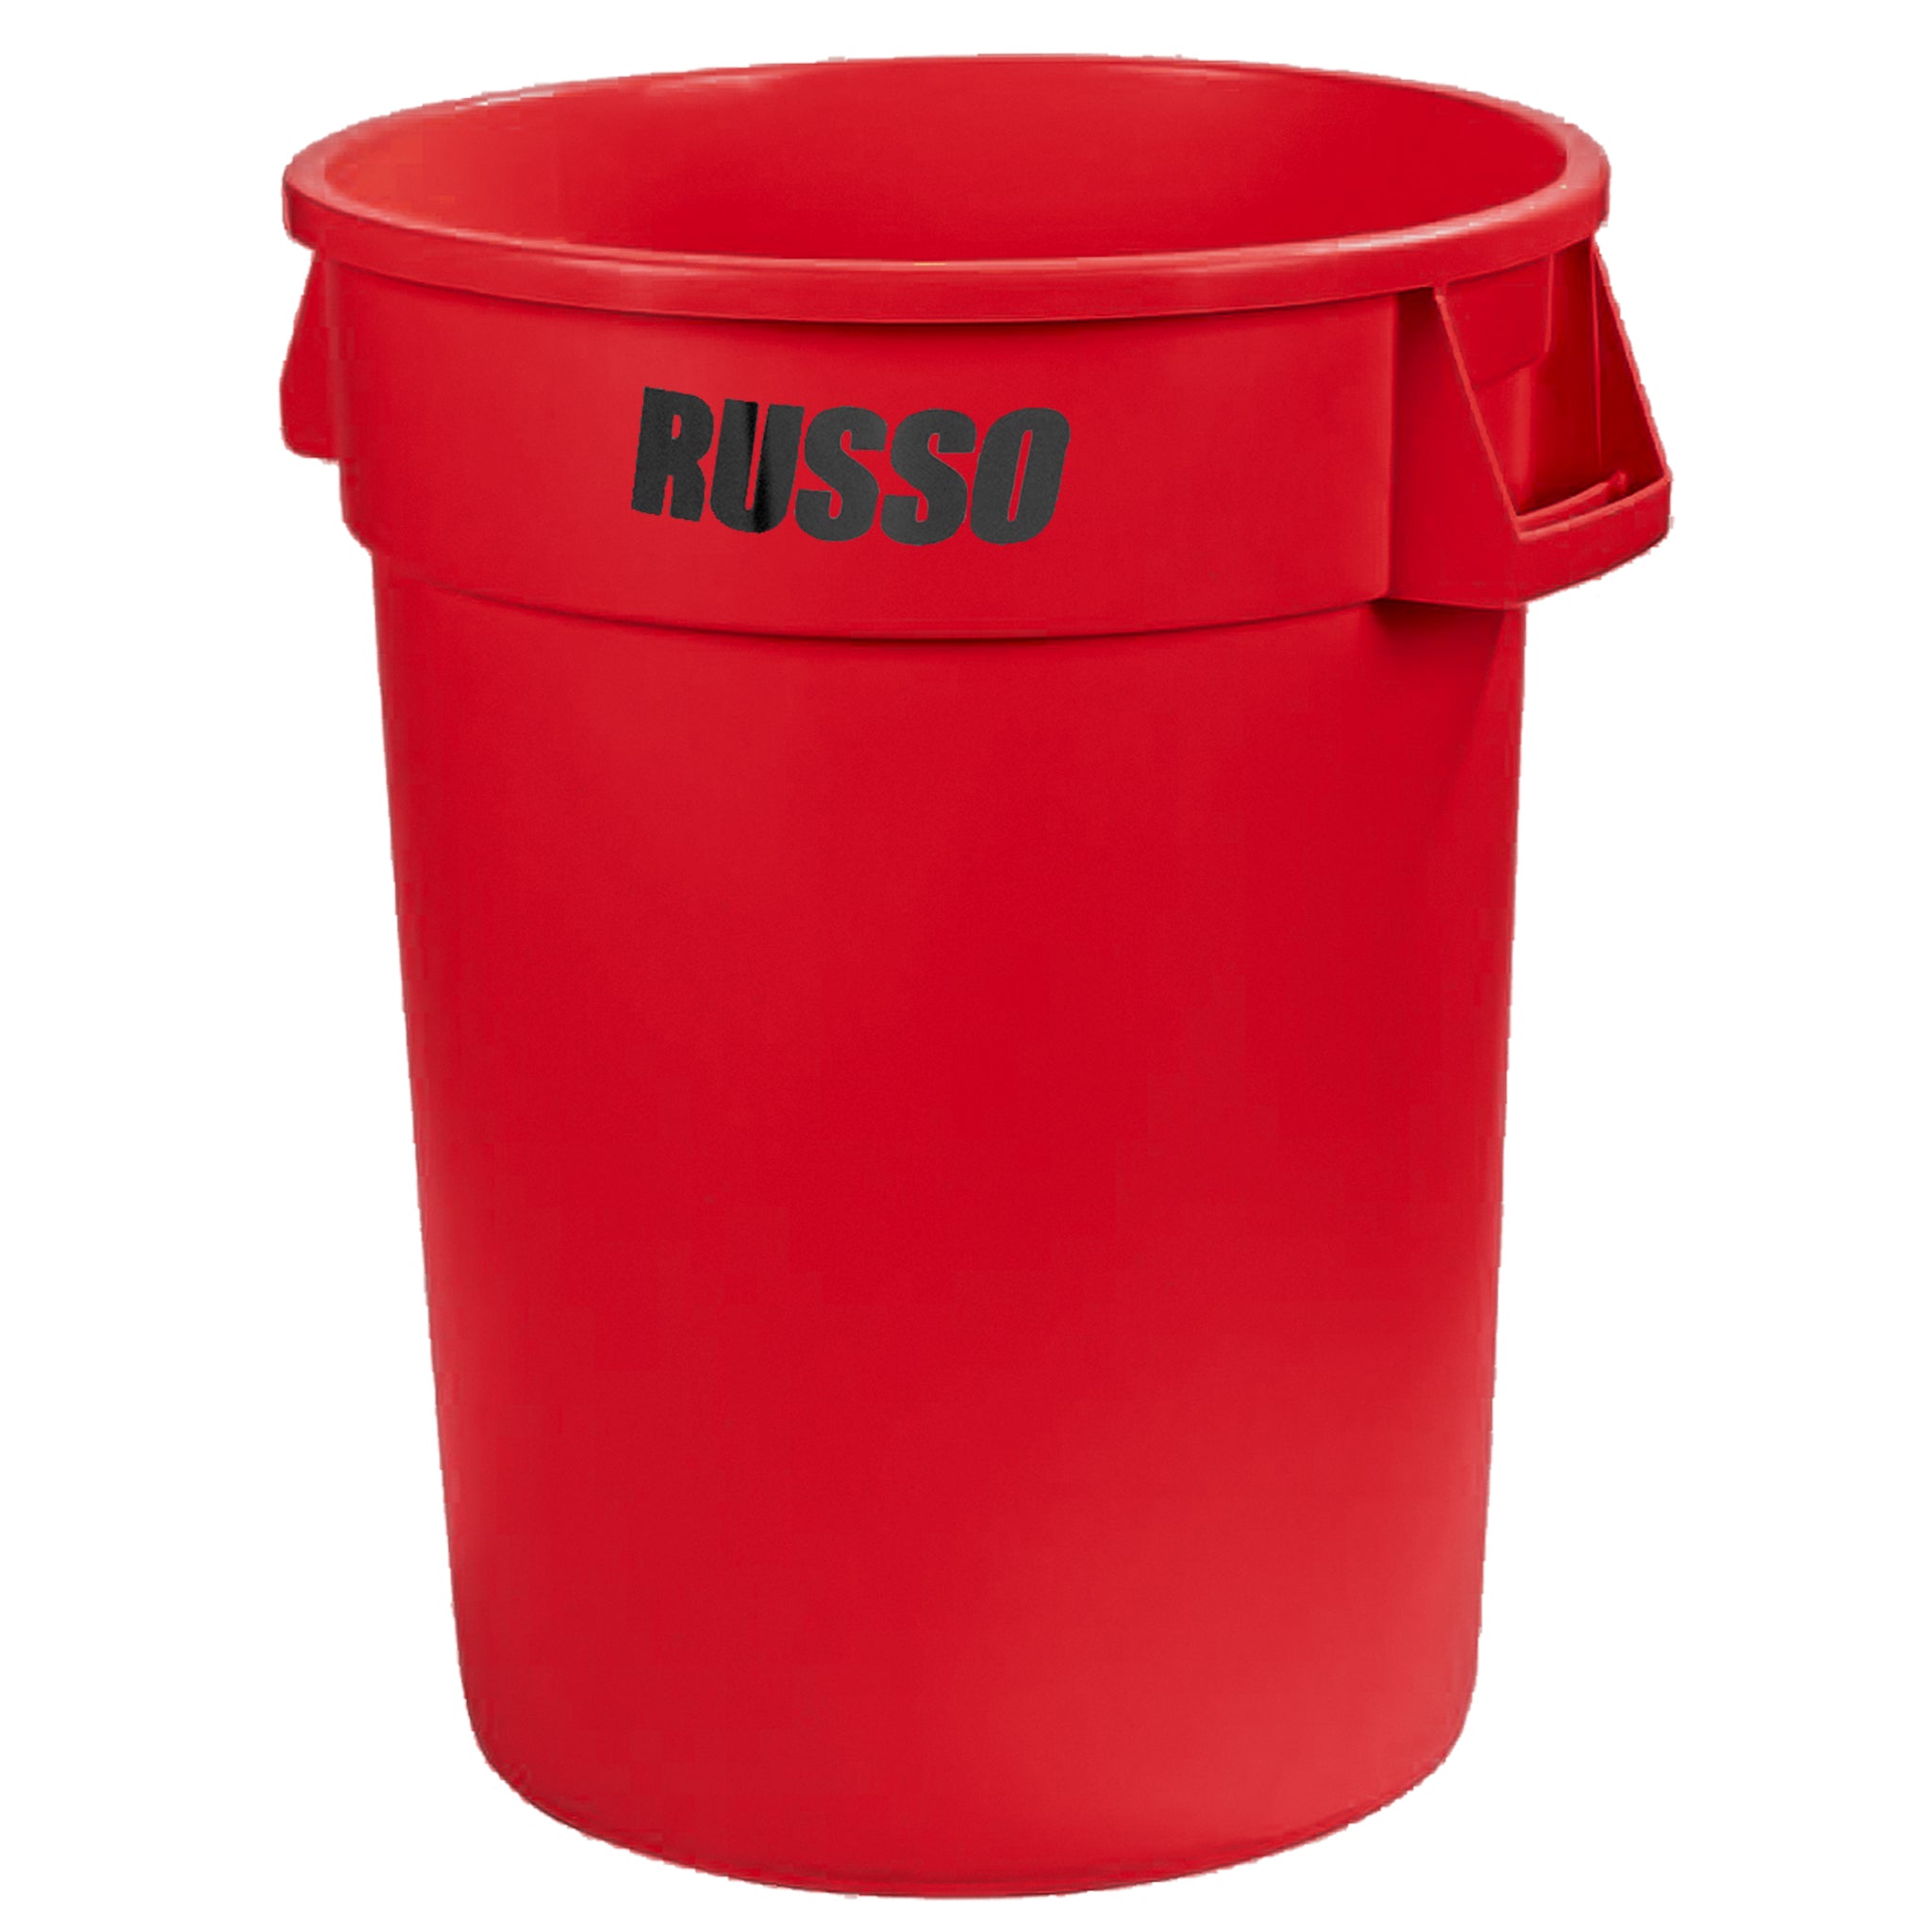 RUSSO Glow Can Container 44 Gallon – Red